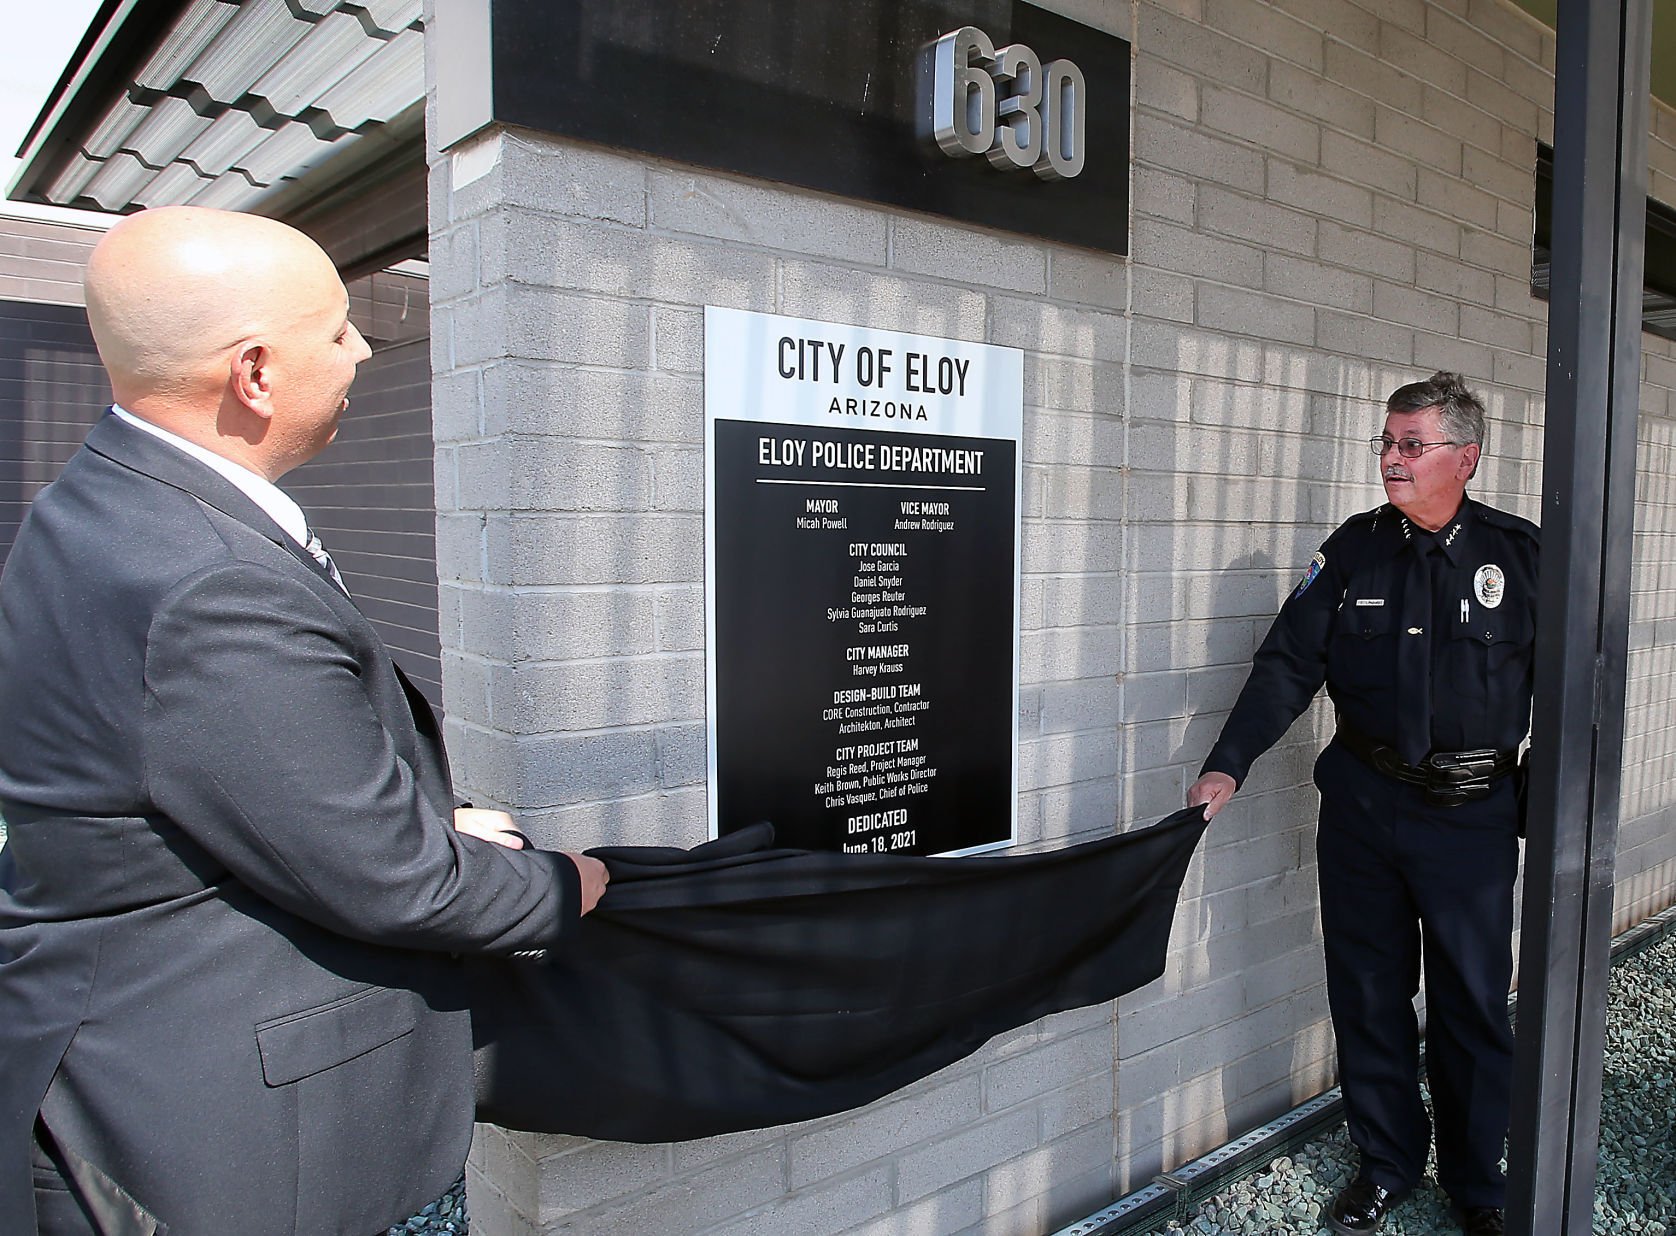 Eloy celebrates its new police department building | News